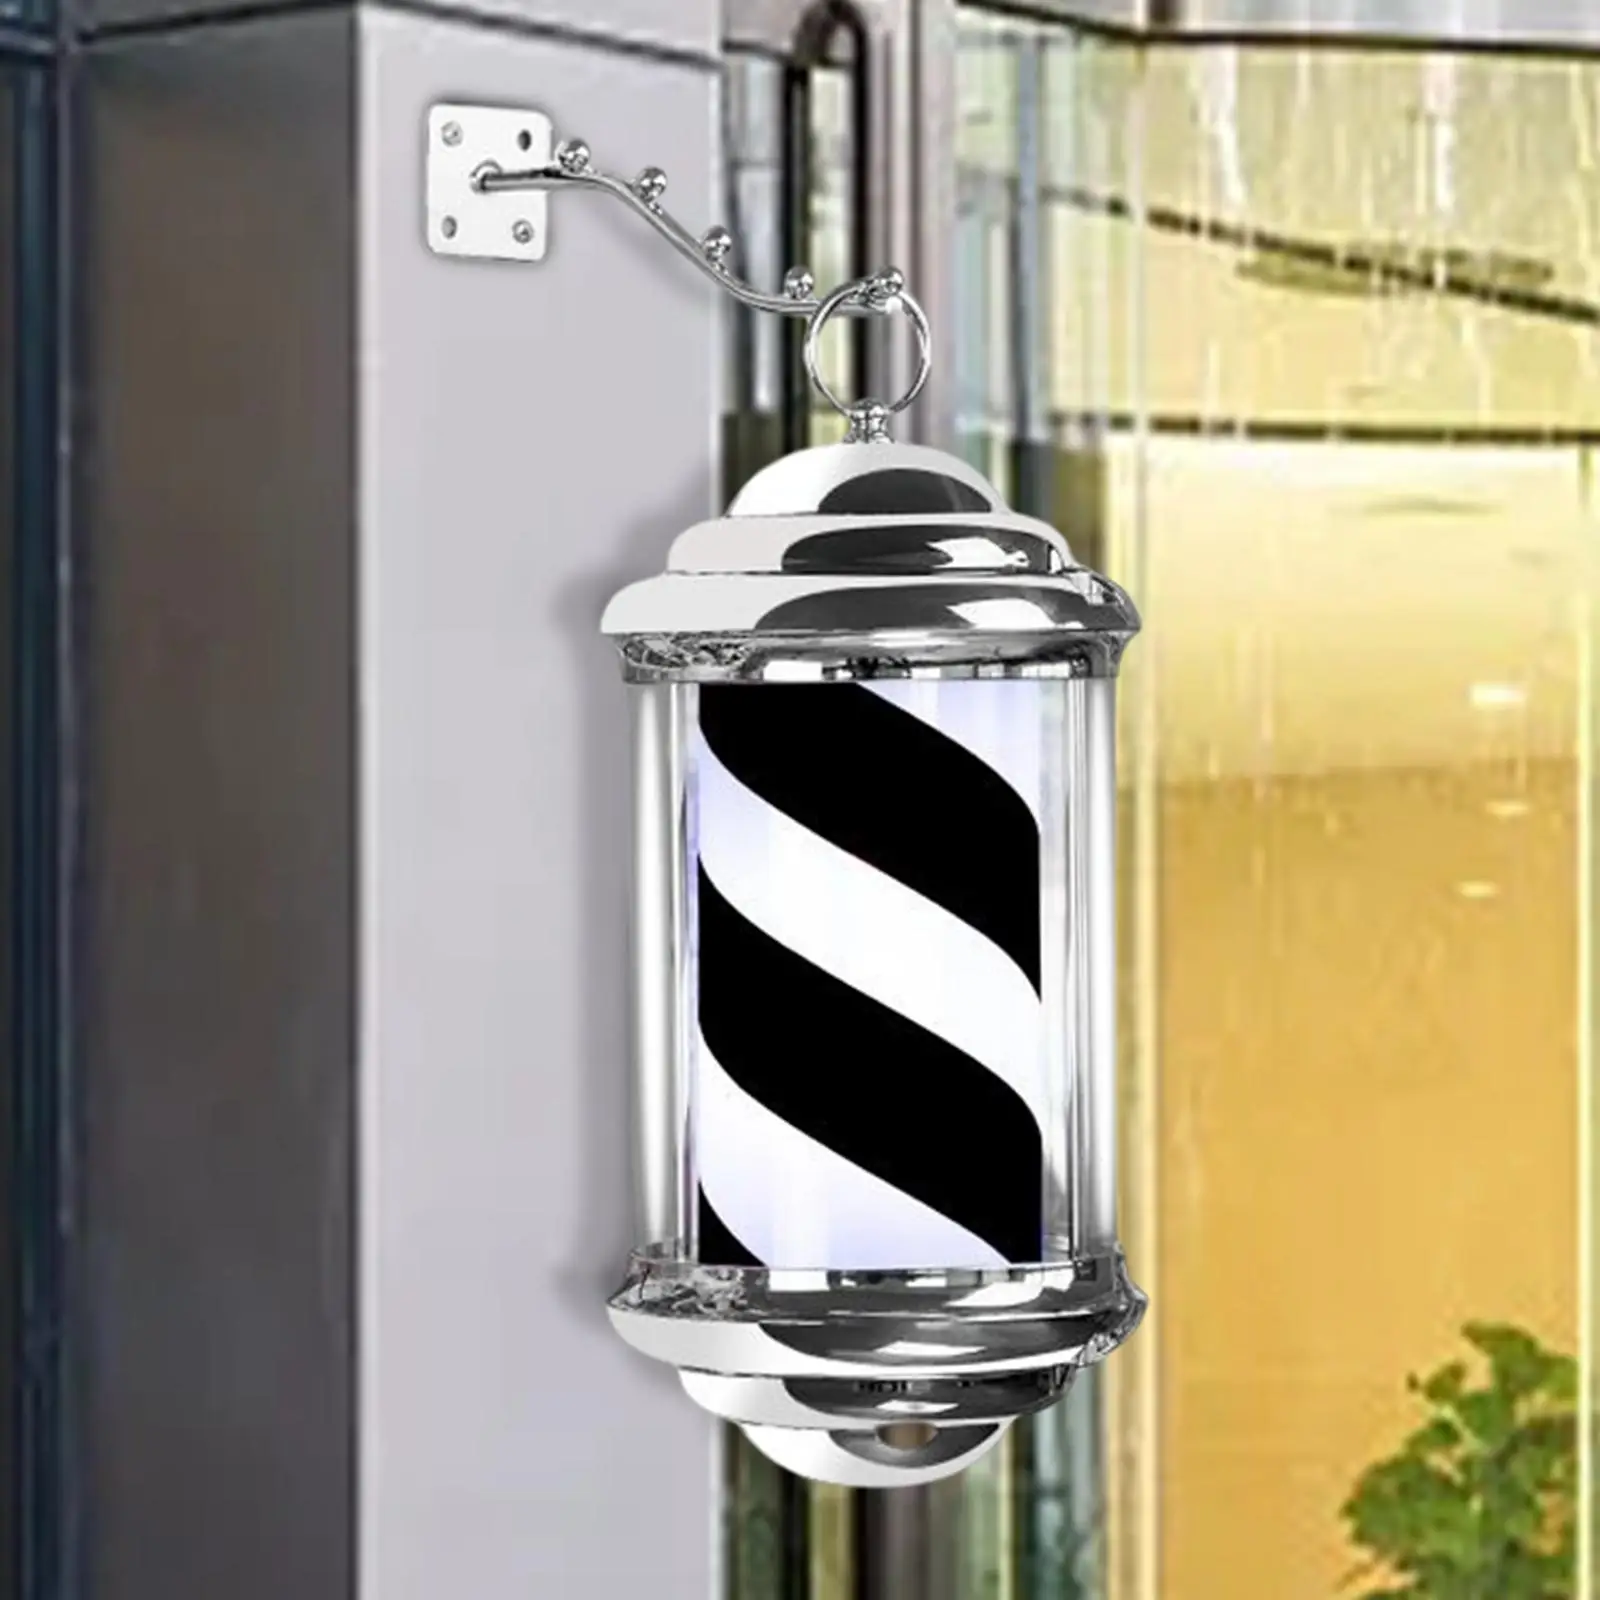 Rainproof Rotating Barber Pole LED Light Hair Salon Shop Open Sign Wall Mounted with Hanging Rack Stripes for Hairdressing Party